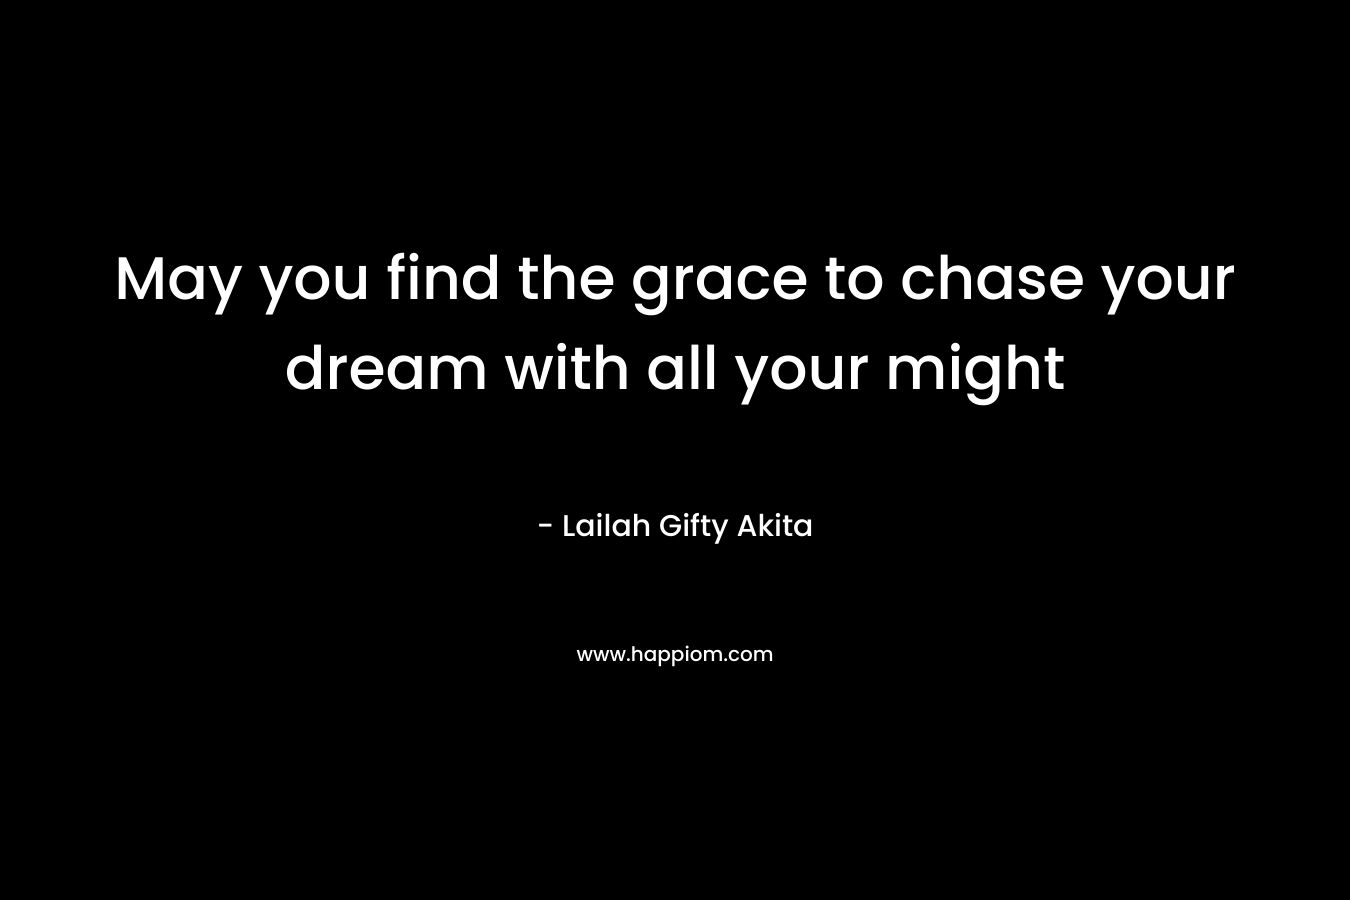 May you find the grace to chase your dream with all your might